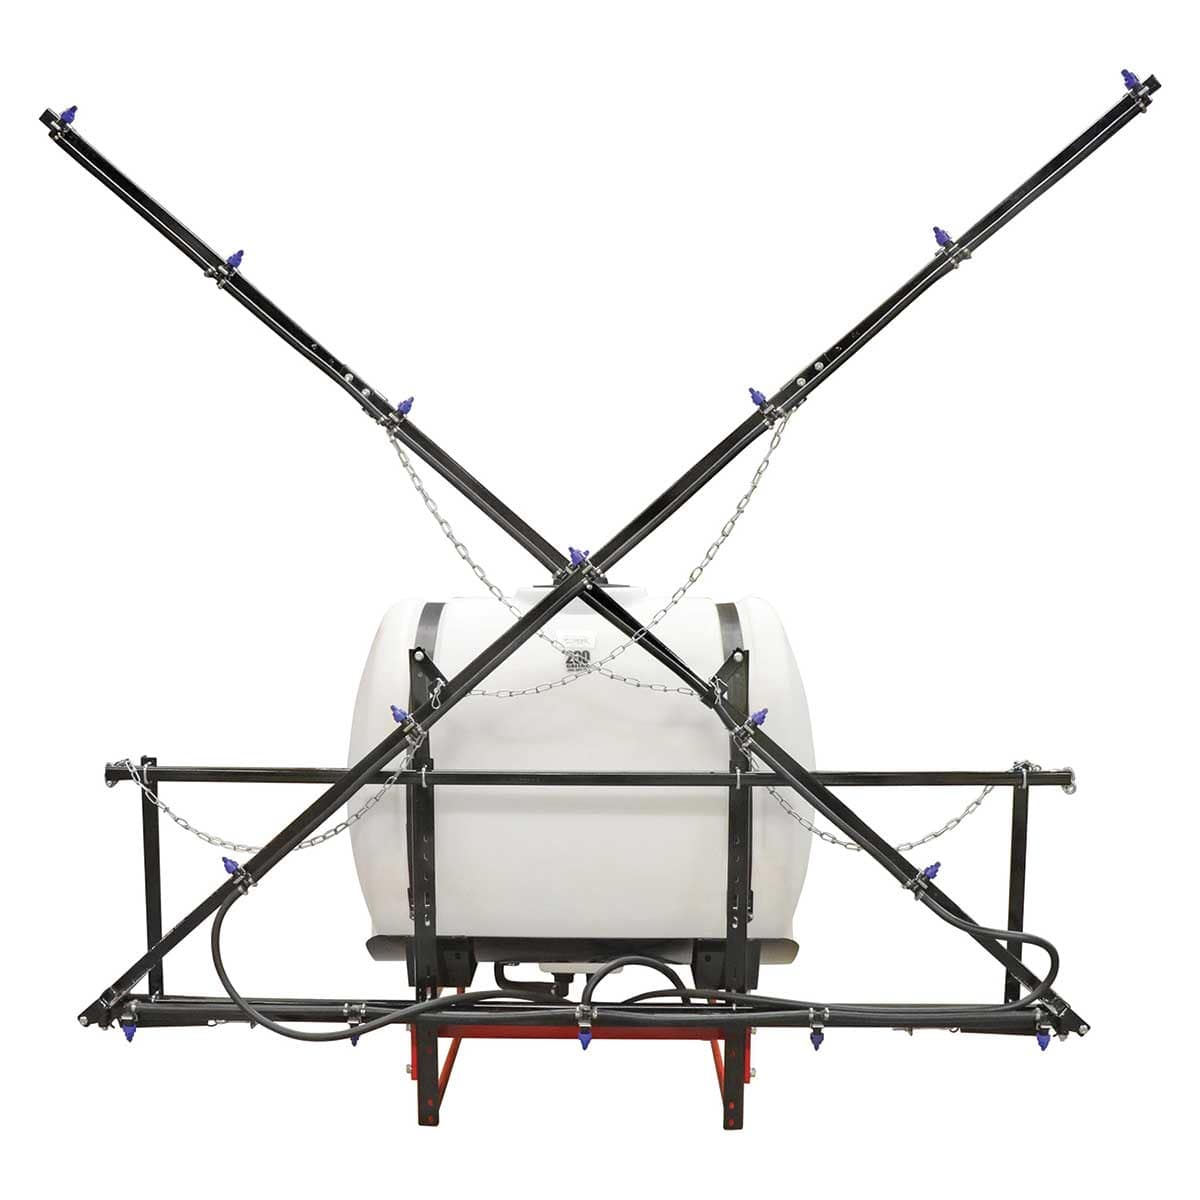 Fimco 200 Gallon 3-Point Hitch Sprayer with 28' Boom